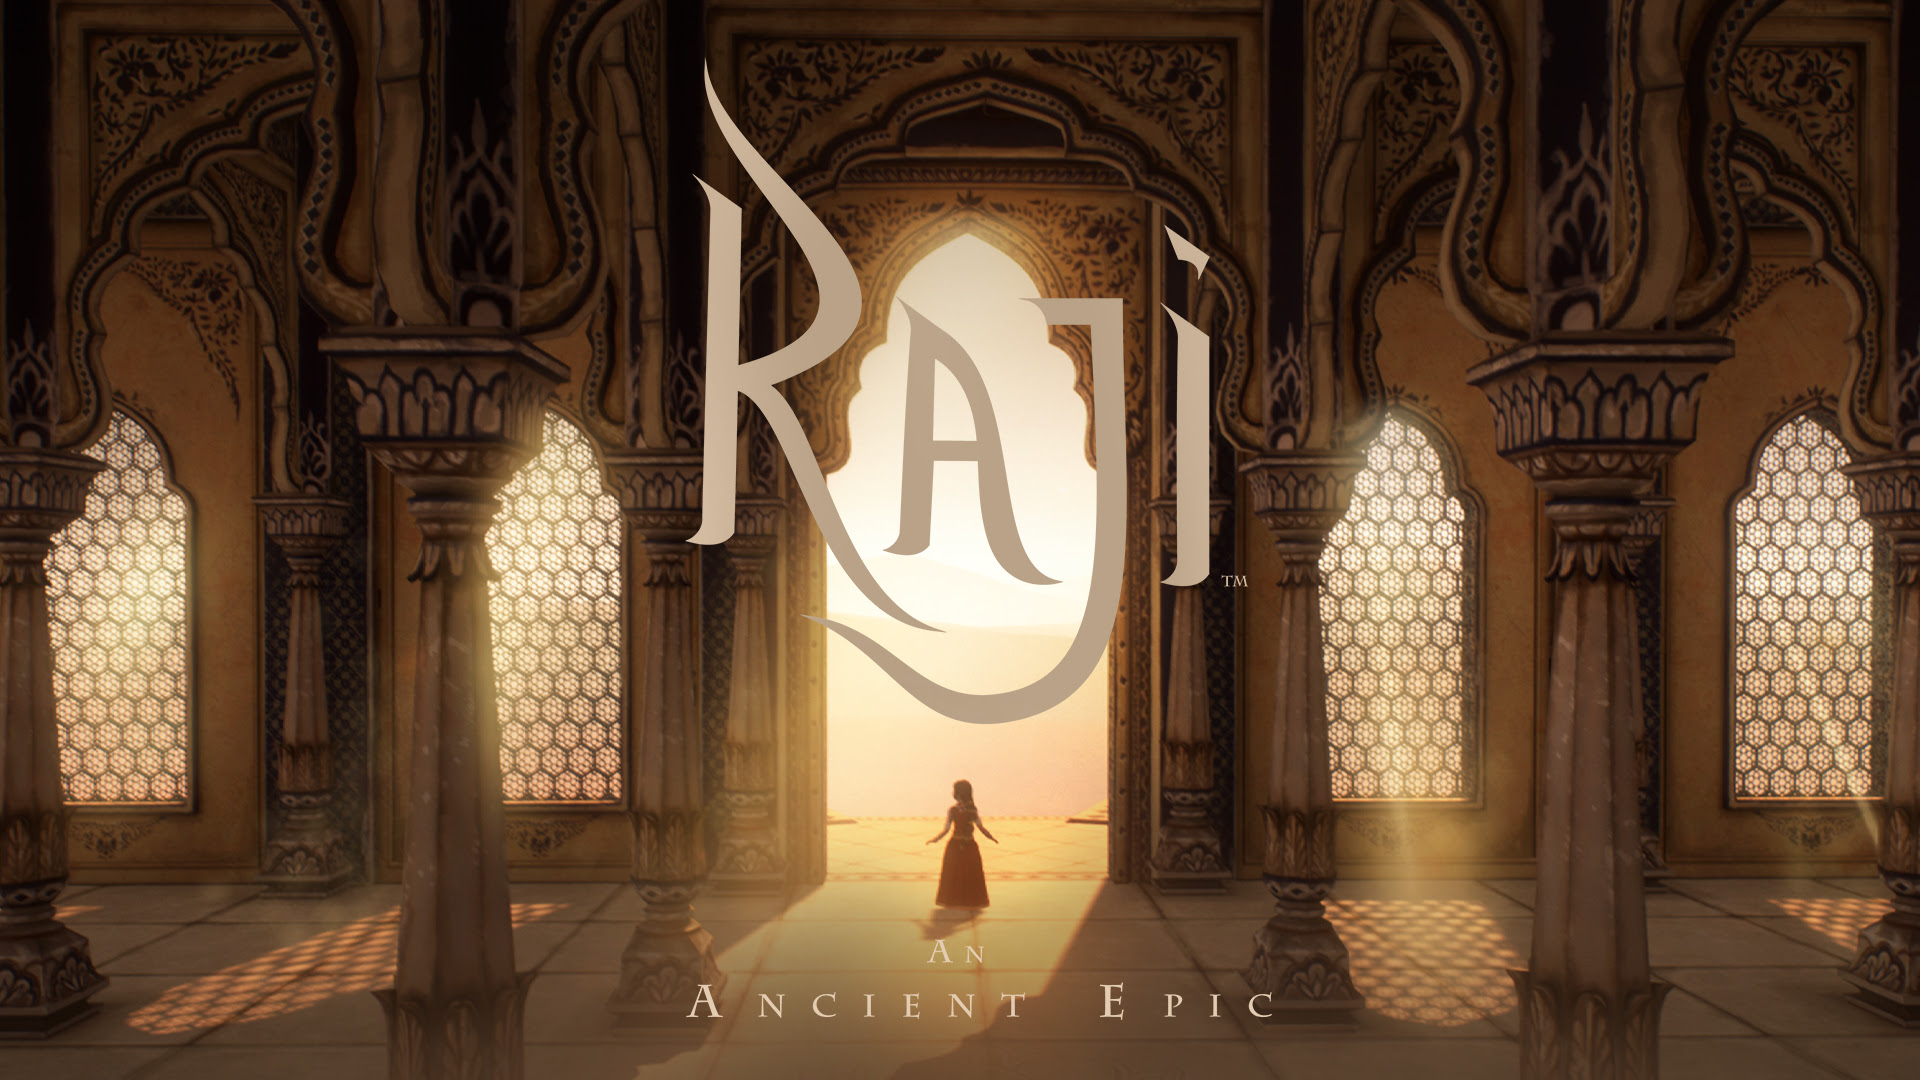 Battle Ancient Evil and Explore Indian Folklore in Raji: an Ancient Epic (PC, Xbox One, and PS4)